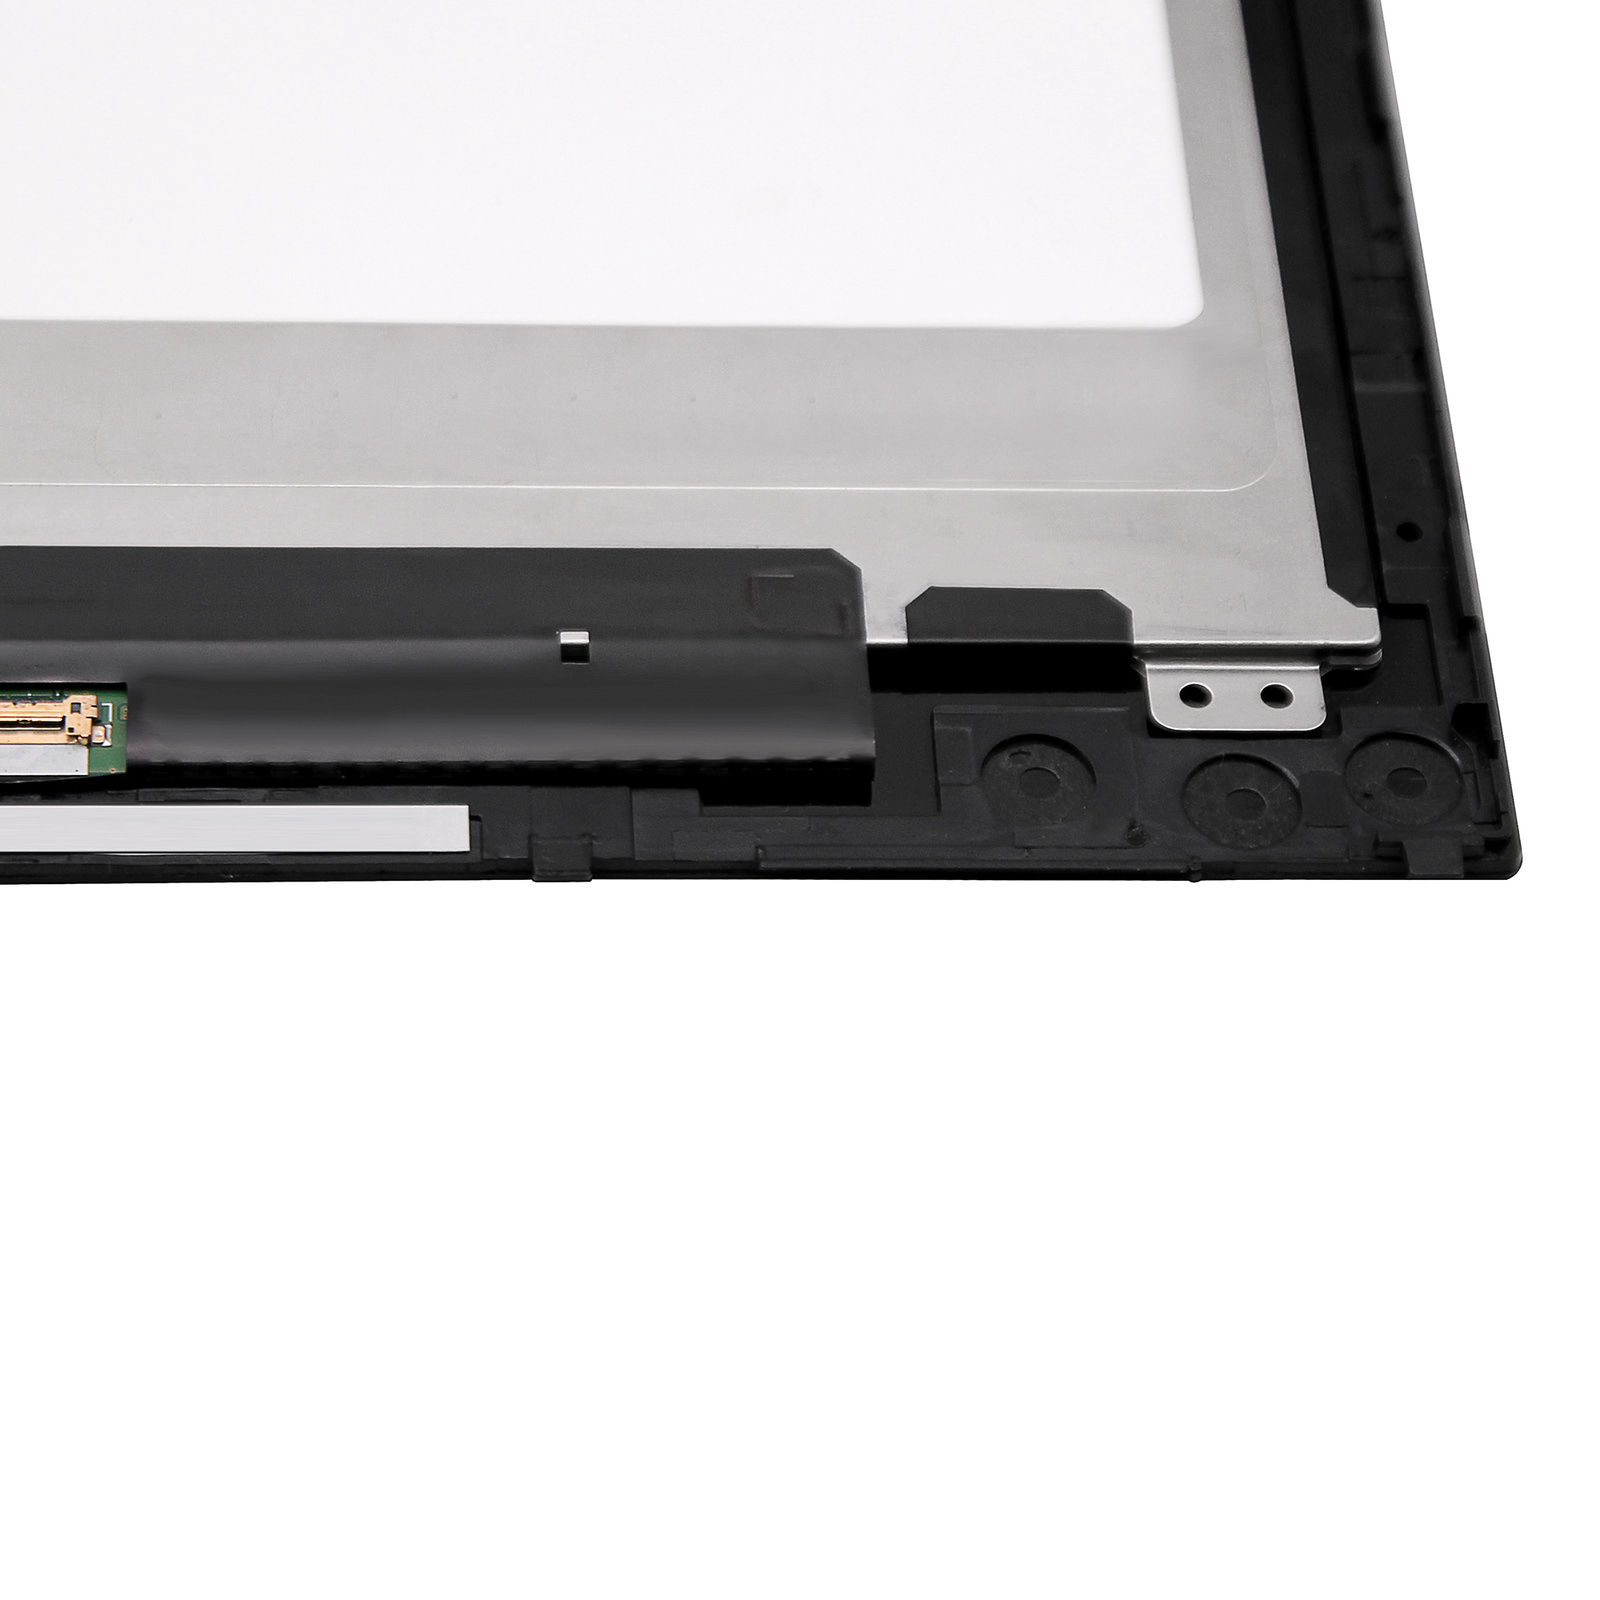 Screen Display Replacement For HP PAVILION X360 13-U010ND LCD Touch Digitizer Assembly